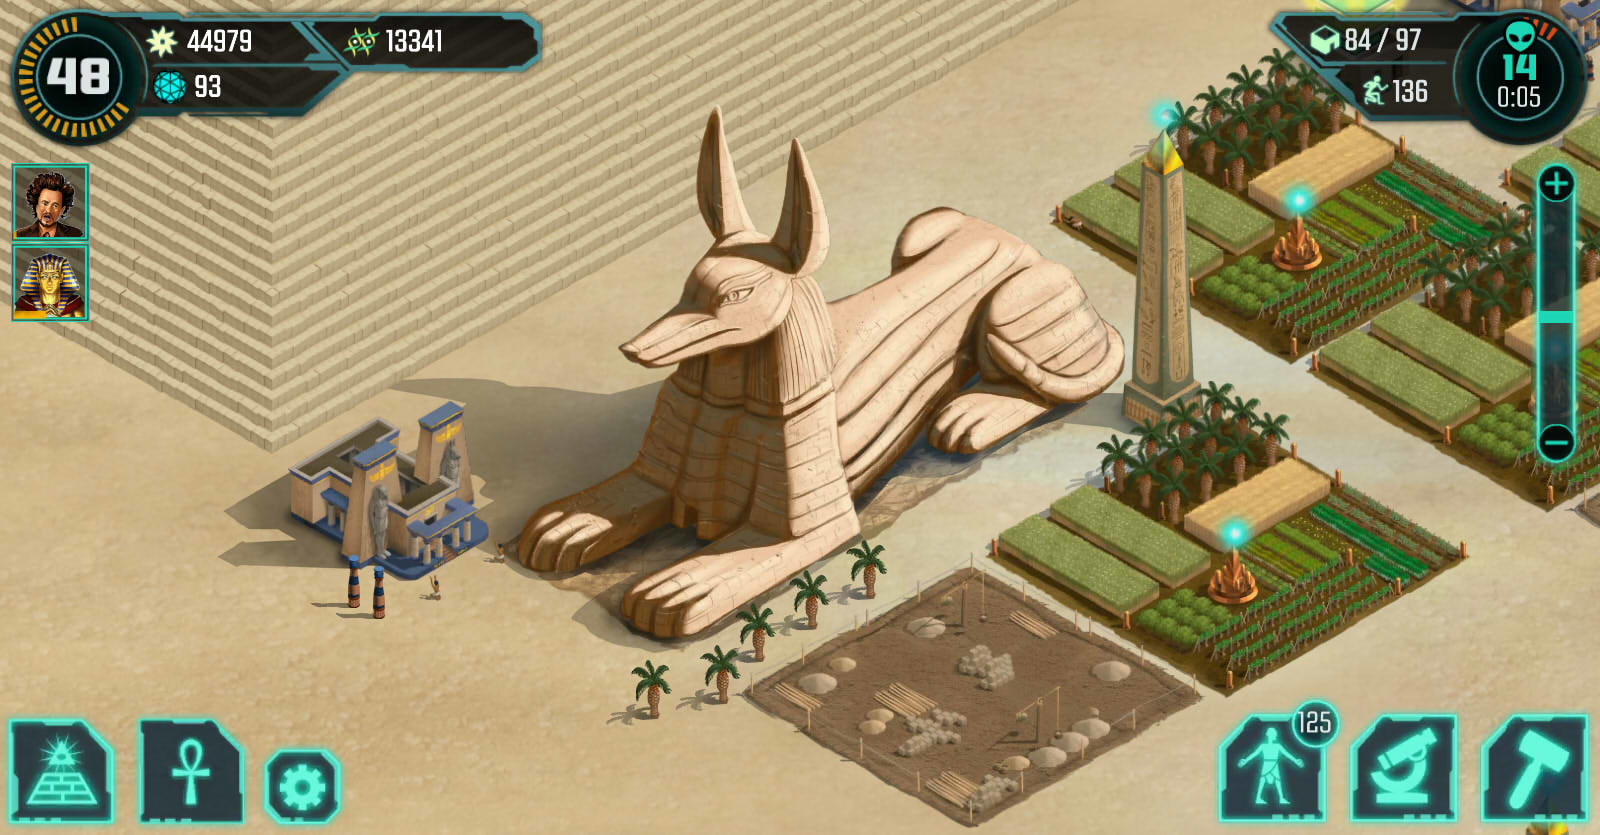 An in-game screenshot of Ancient Aliens Game Oasis showing a farming area